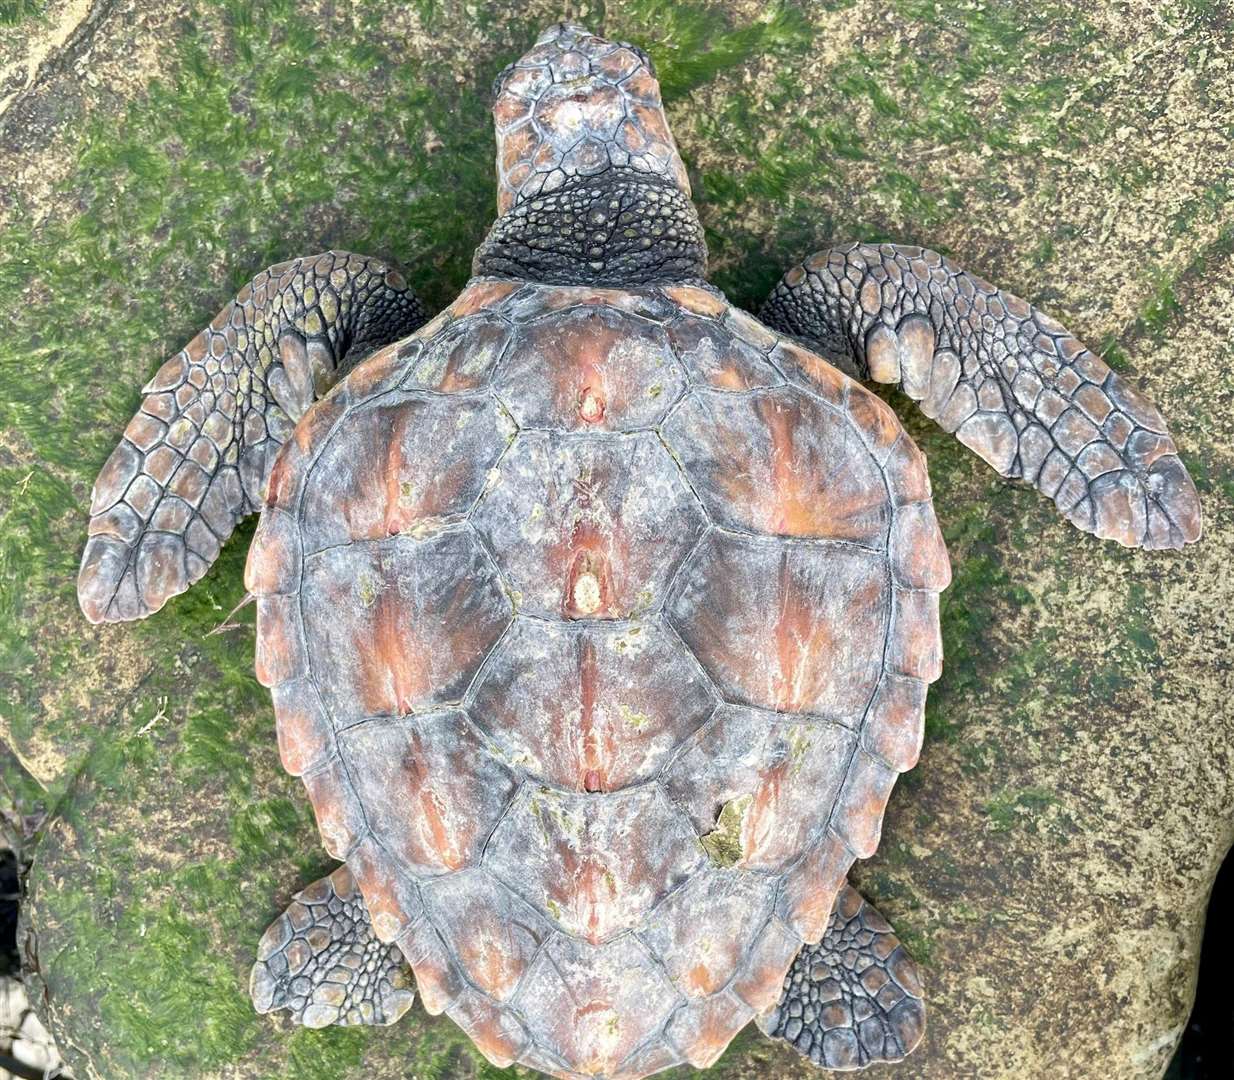 One turtle was found in Cornwall and another in Dorset (pictured). Picture: BDMLR